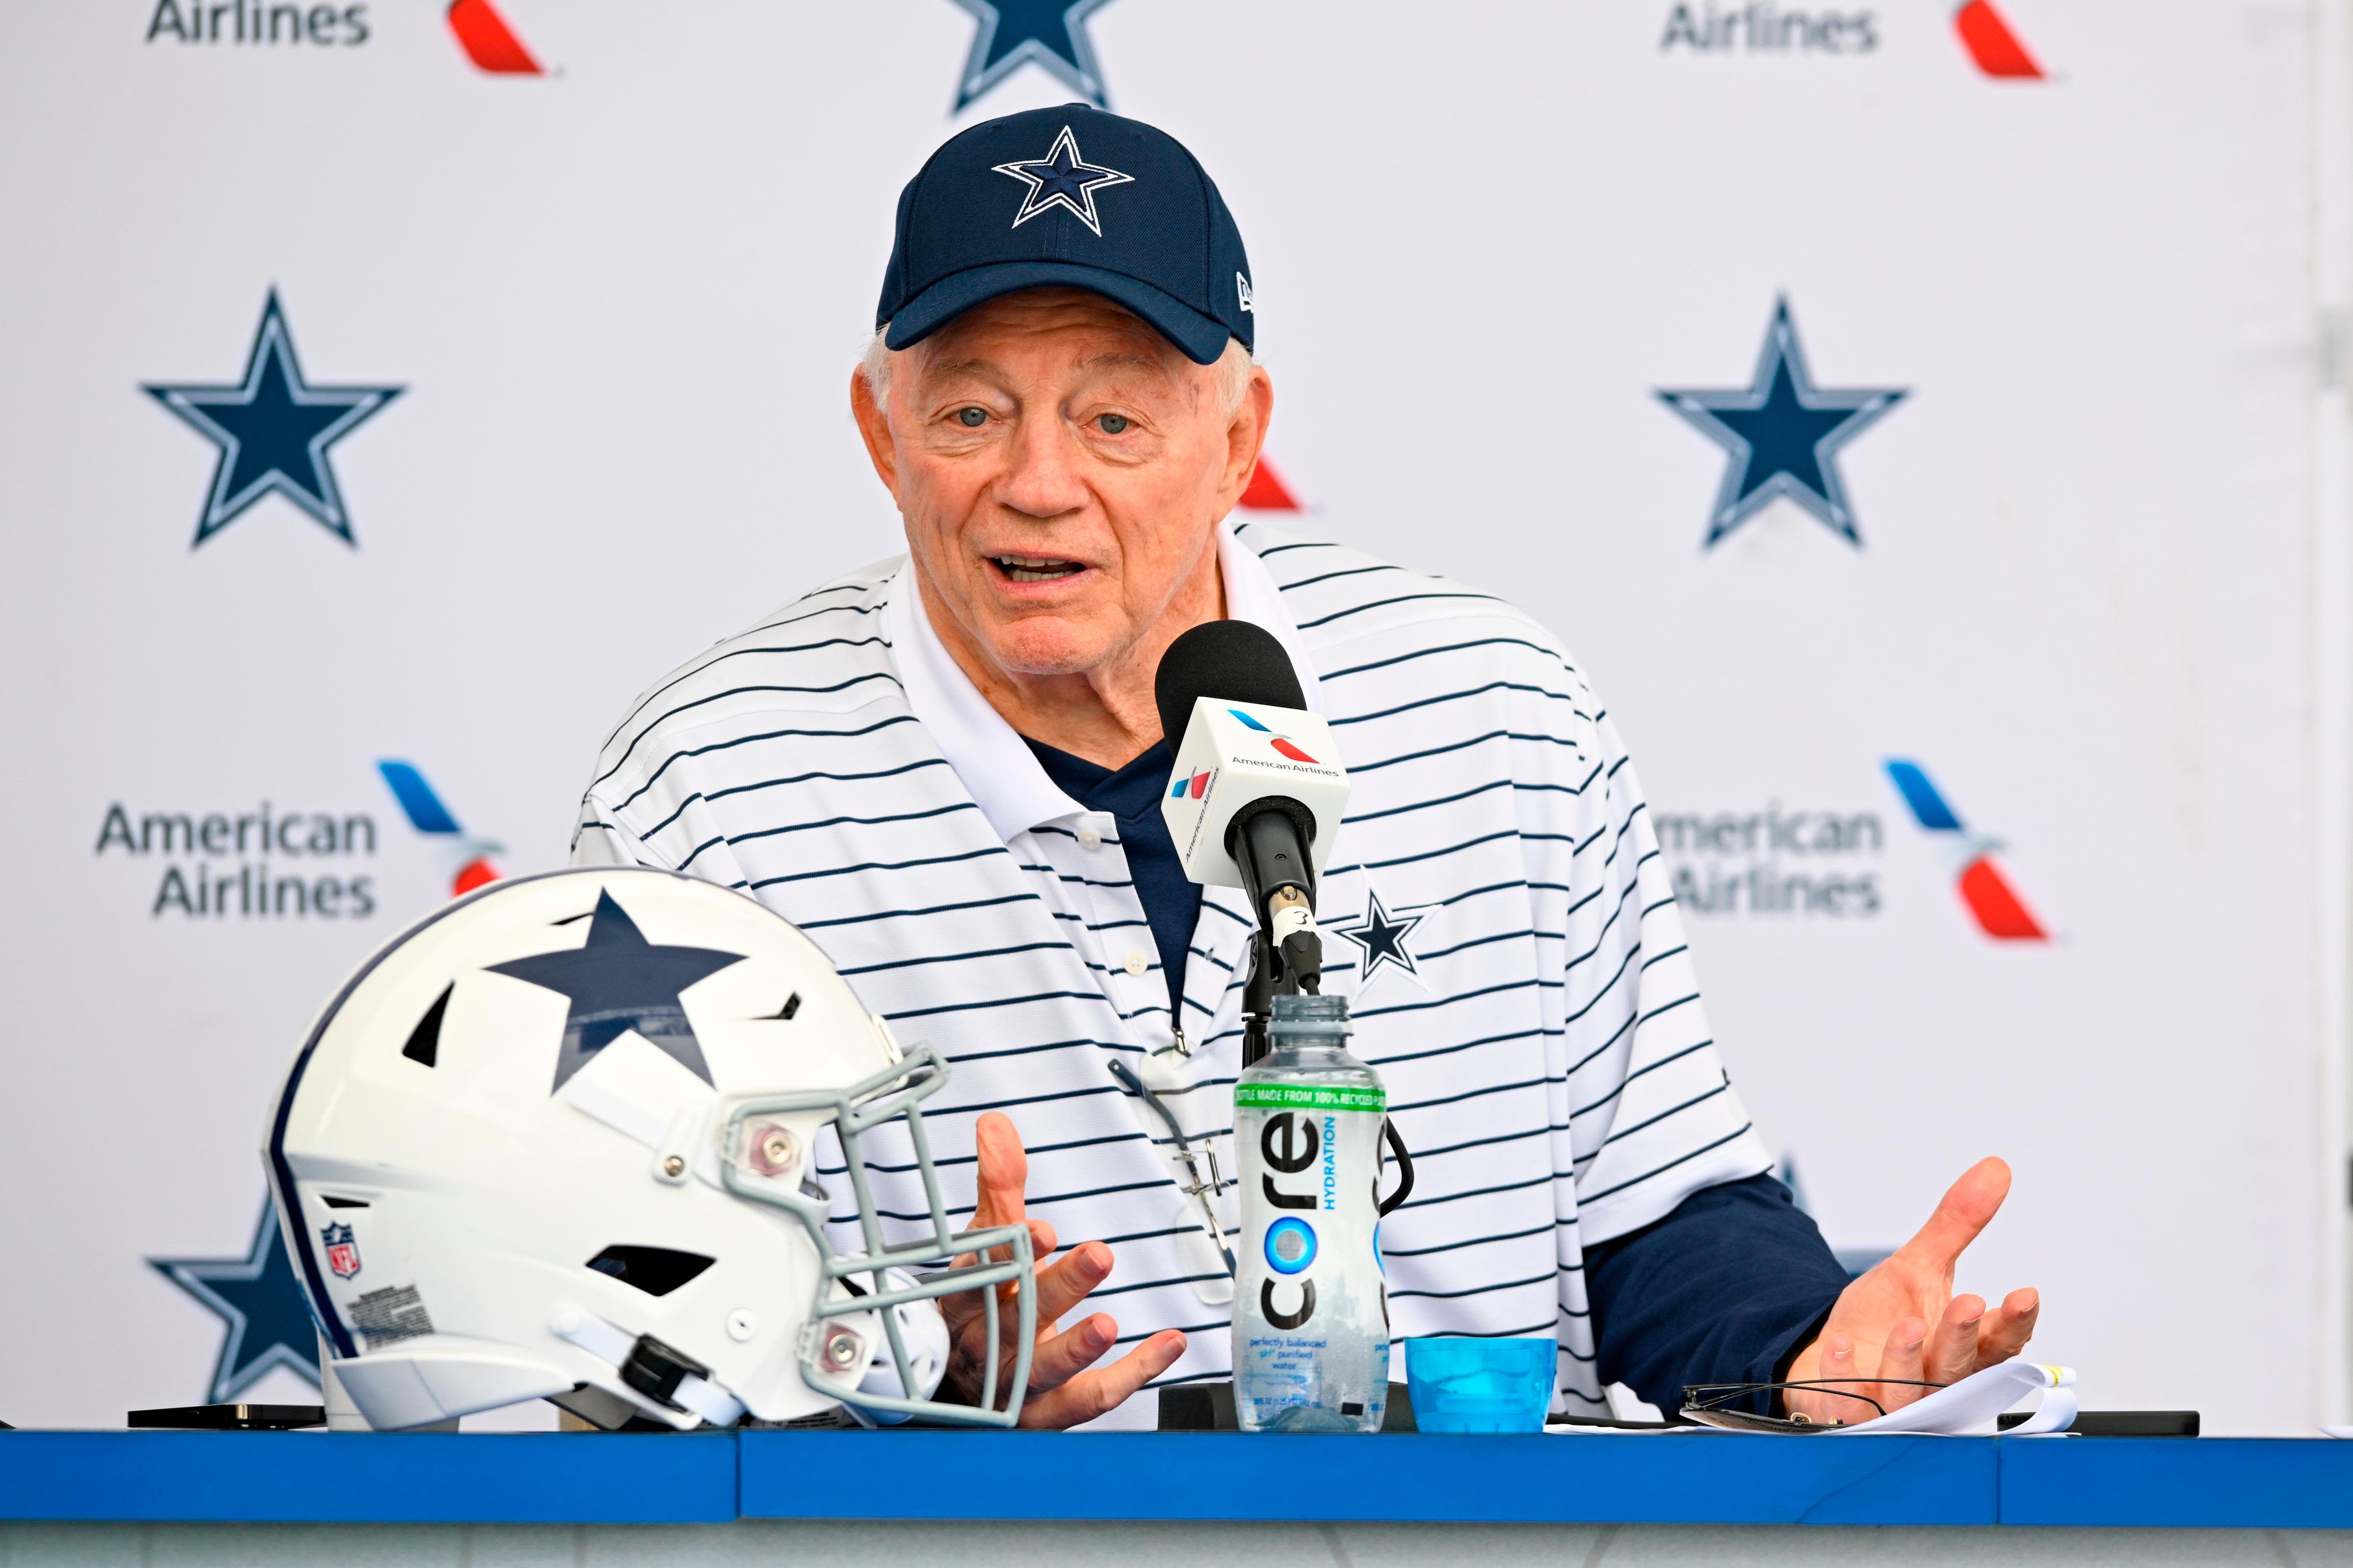 Jerry Jones: Dallas Cowboys owner apologizes for using derogatory term for little people | CNN